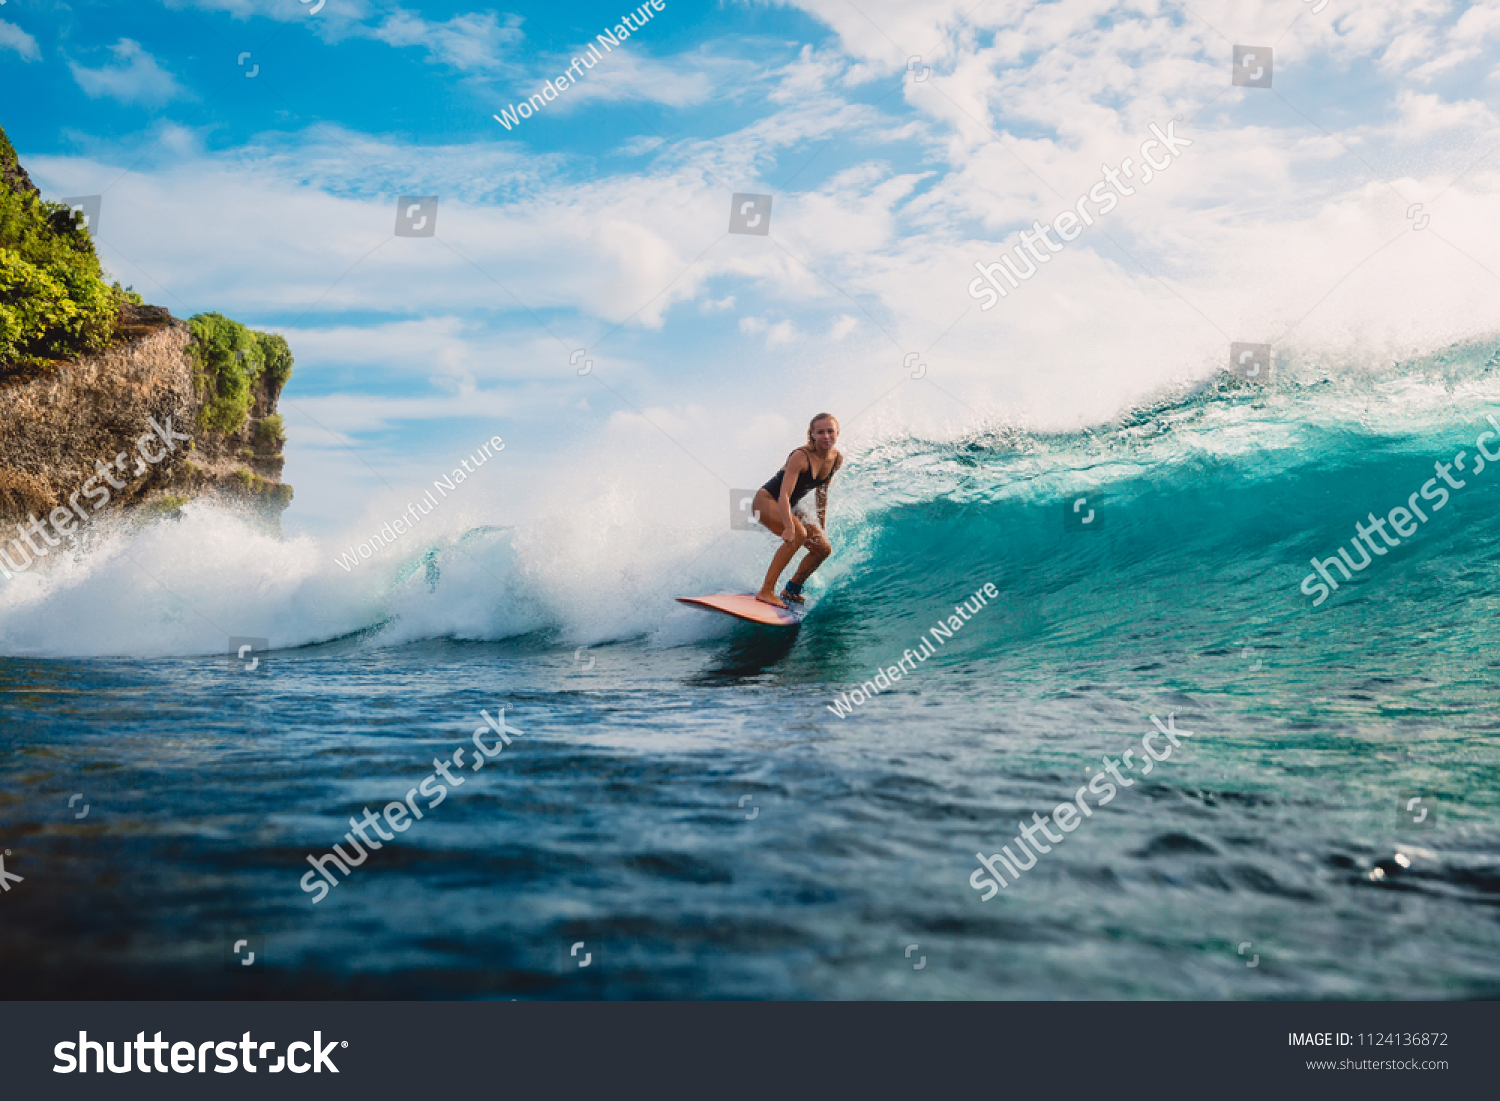 Surf girl on surfboard. Woman in ocean during surfing. Surfer and ocean wave #1124136872